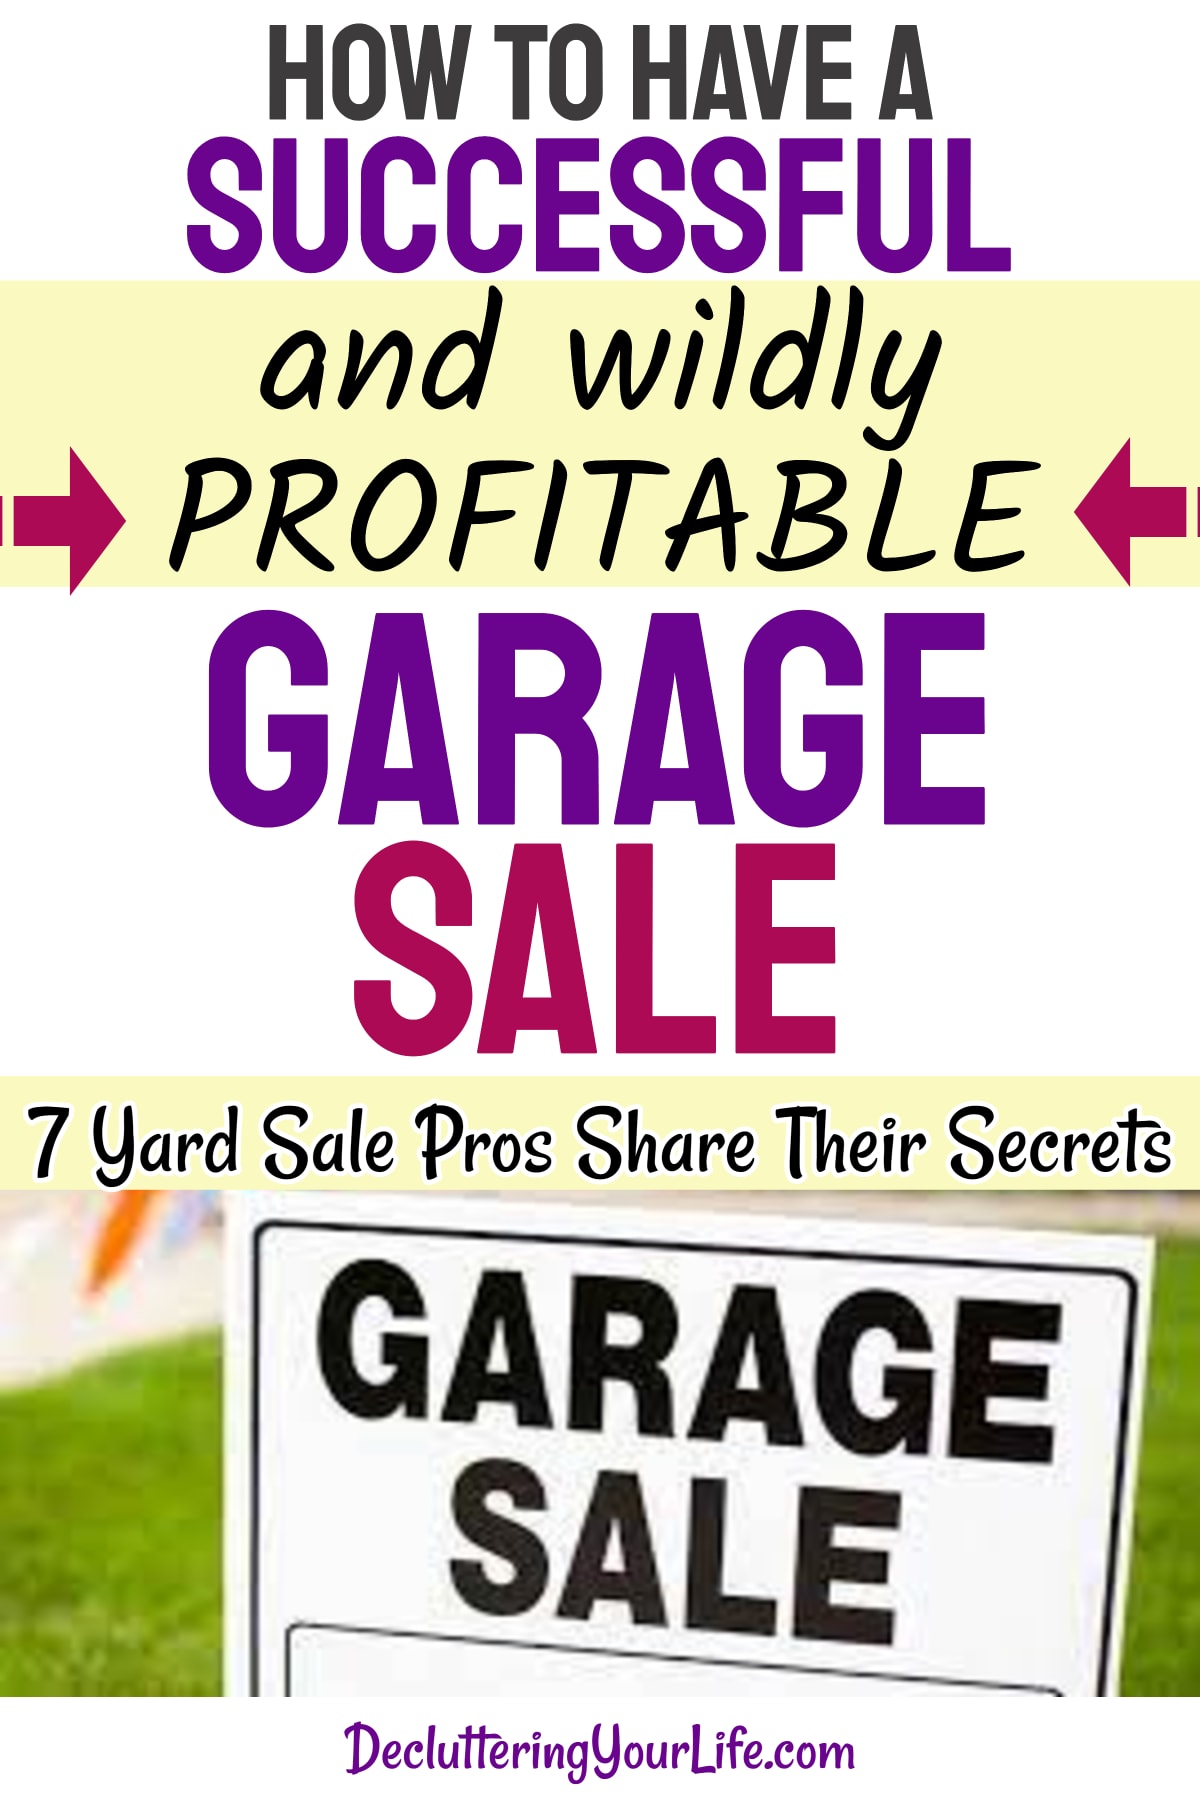 Garage sales tips to make most money at a yard sale